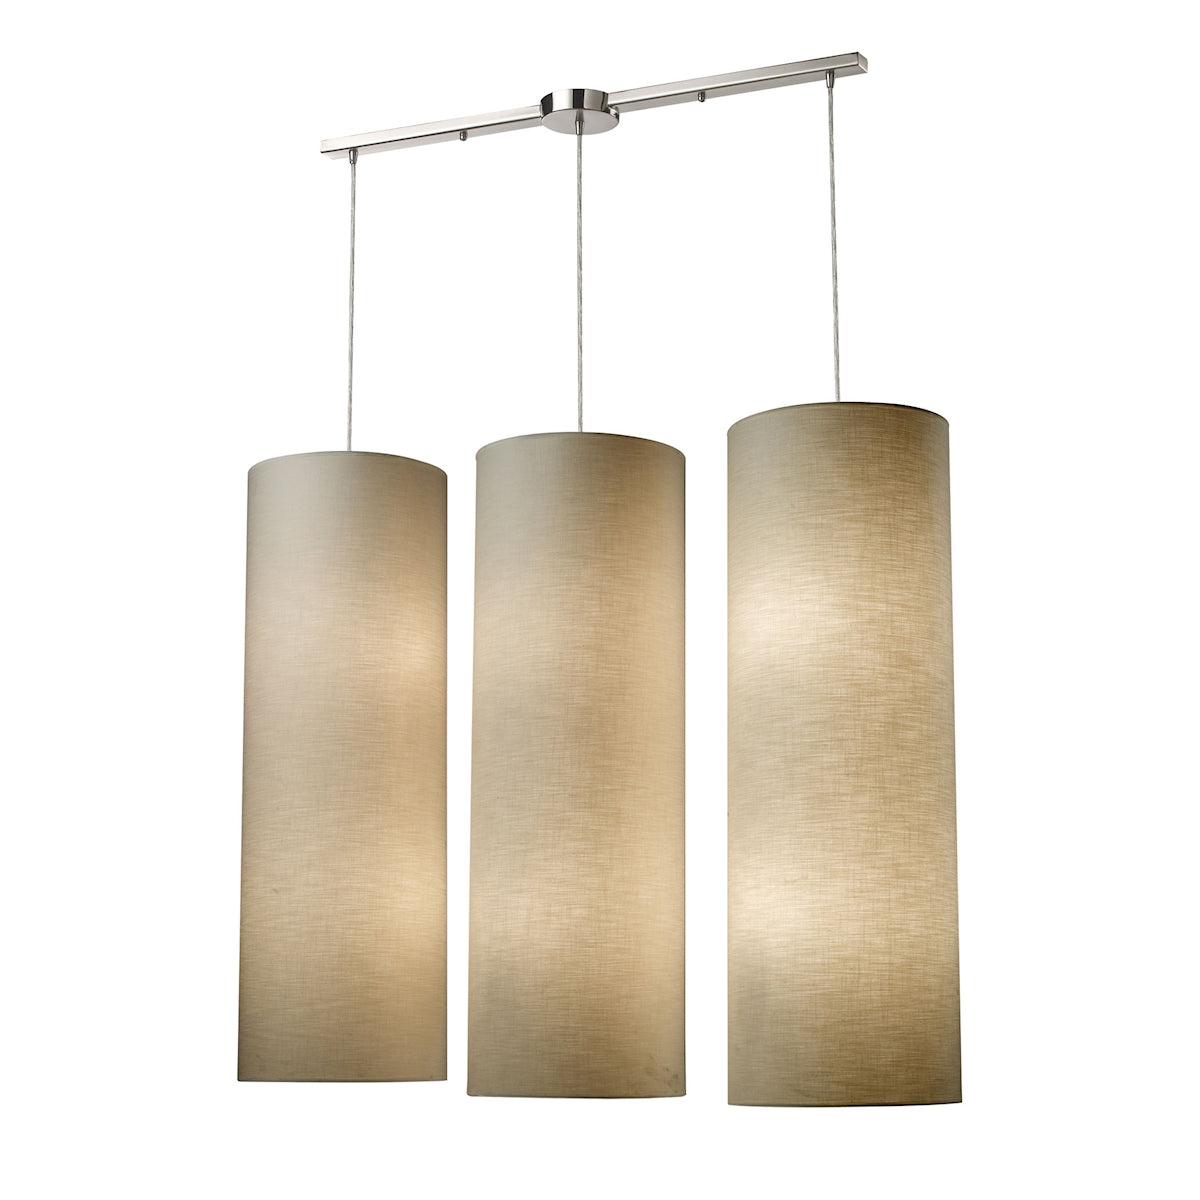 ELK Lighting 20160/12L Fabric Cylinders 12-Light Linear Pendant Fixture in Satin Nickel with 3 Shades